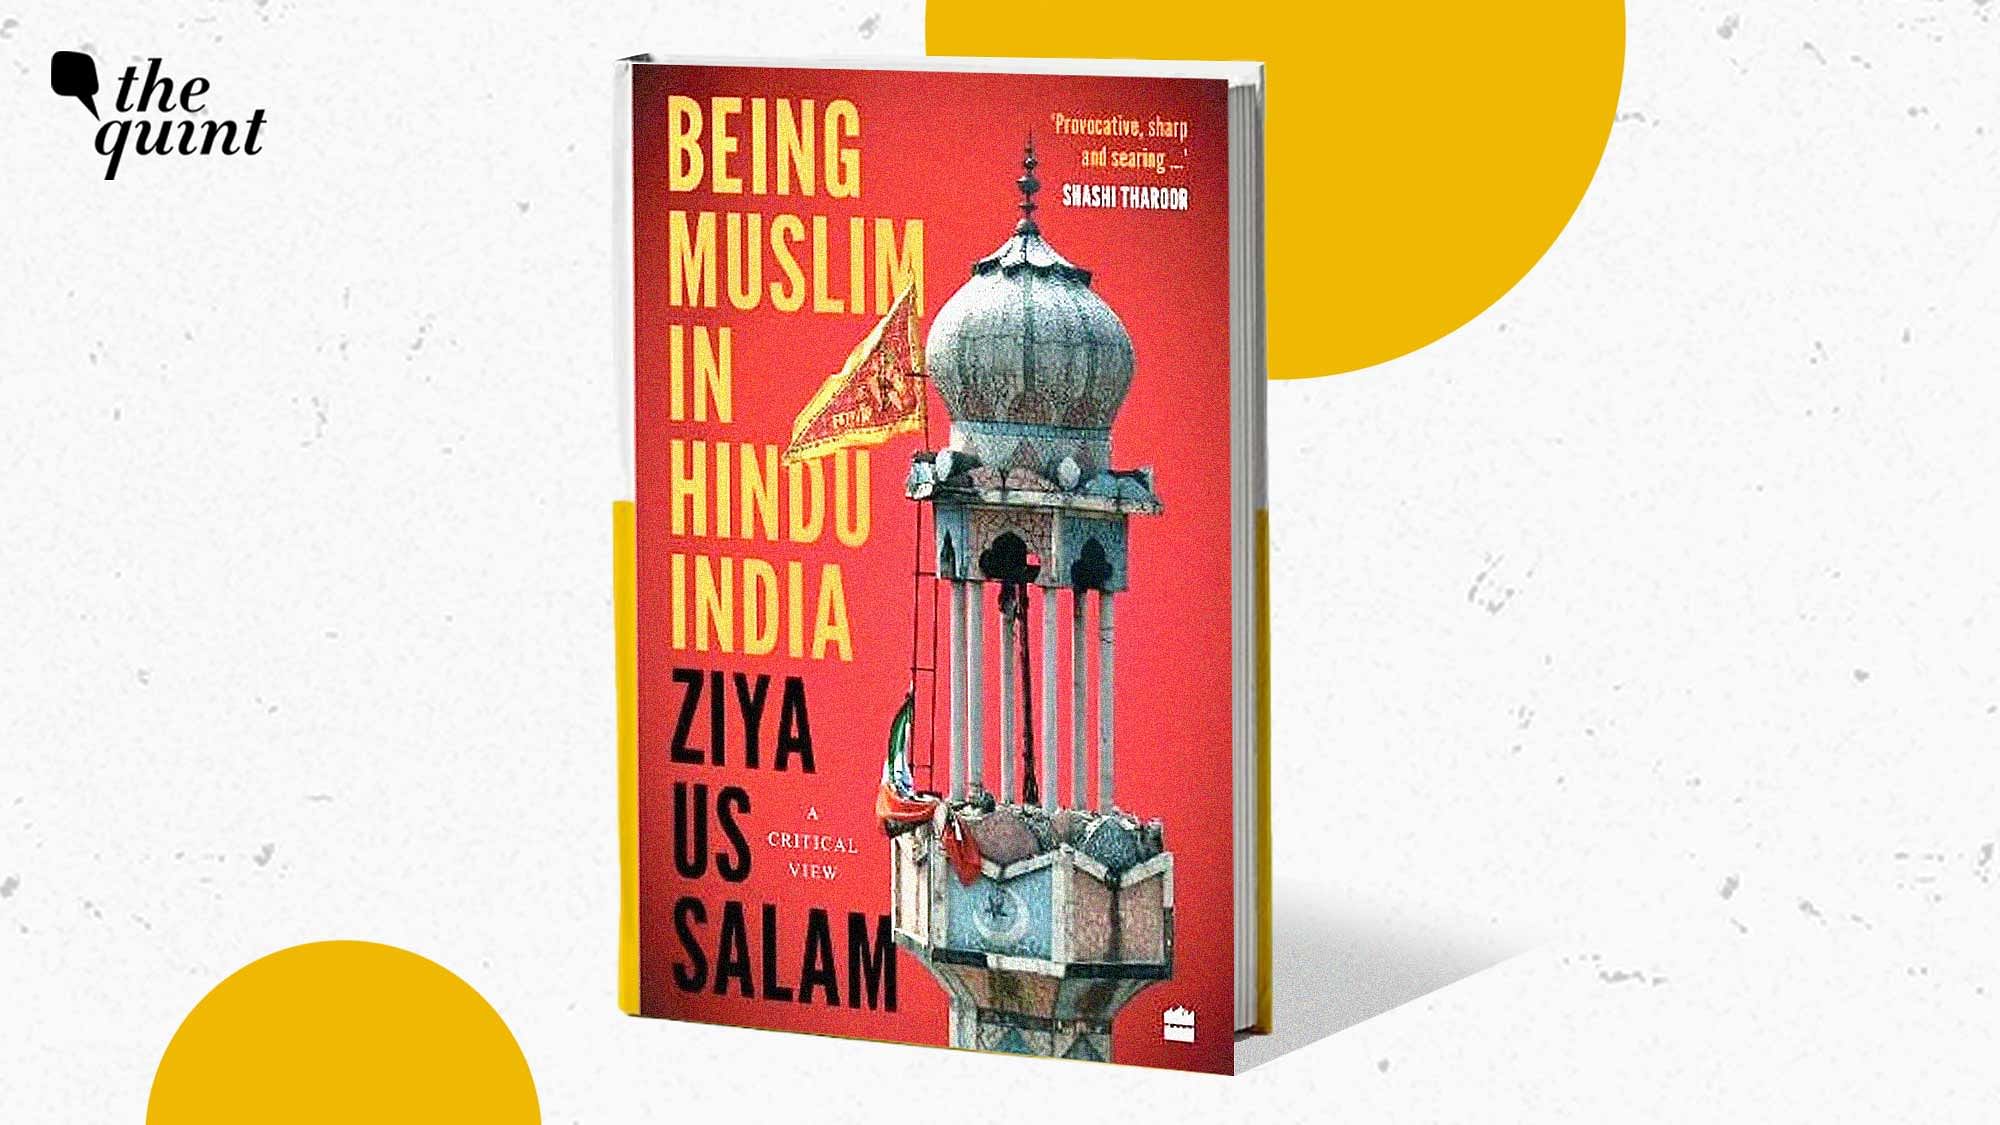 <div class="paragraphs"><p>Ziya Us Salam's new book is titled 'Being Muslim In Hindu India'.&nbsp;</p></div>